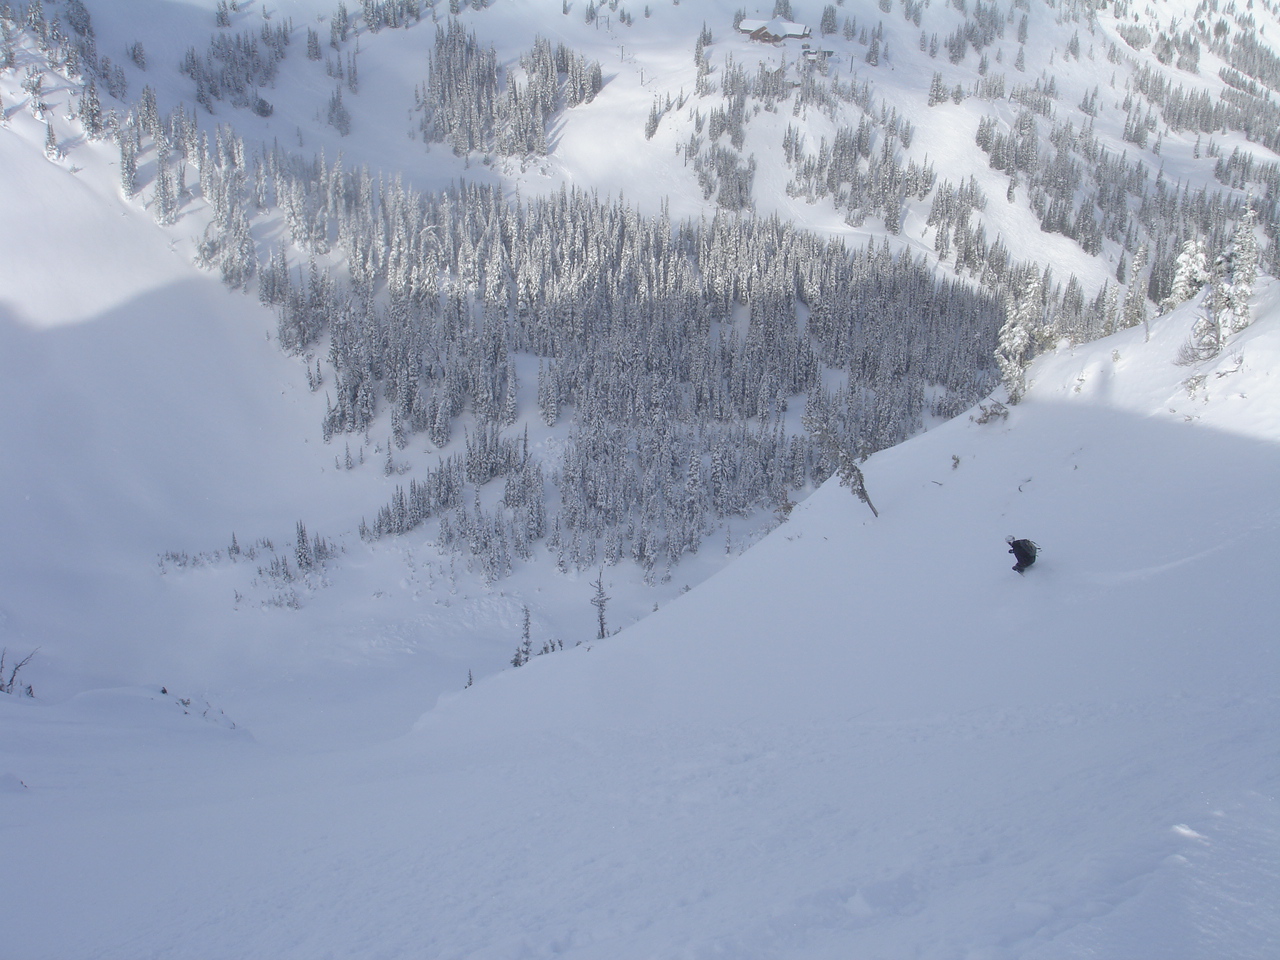 Skiing the North side of the King into Avalanche Basin